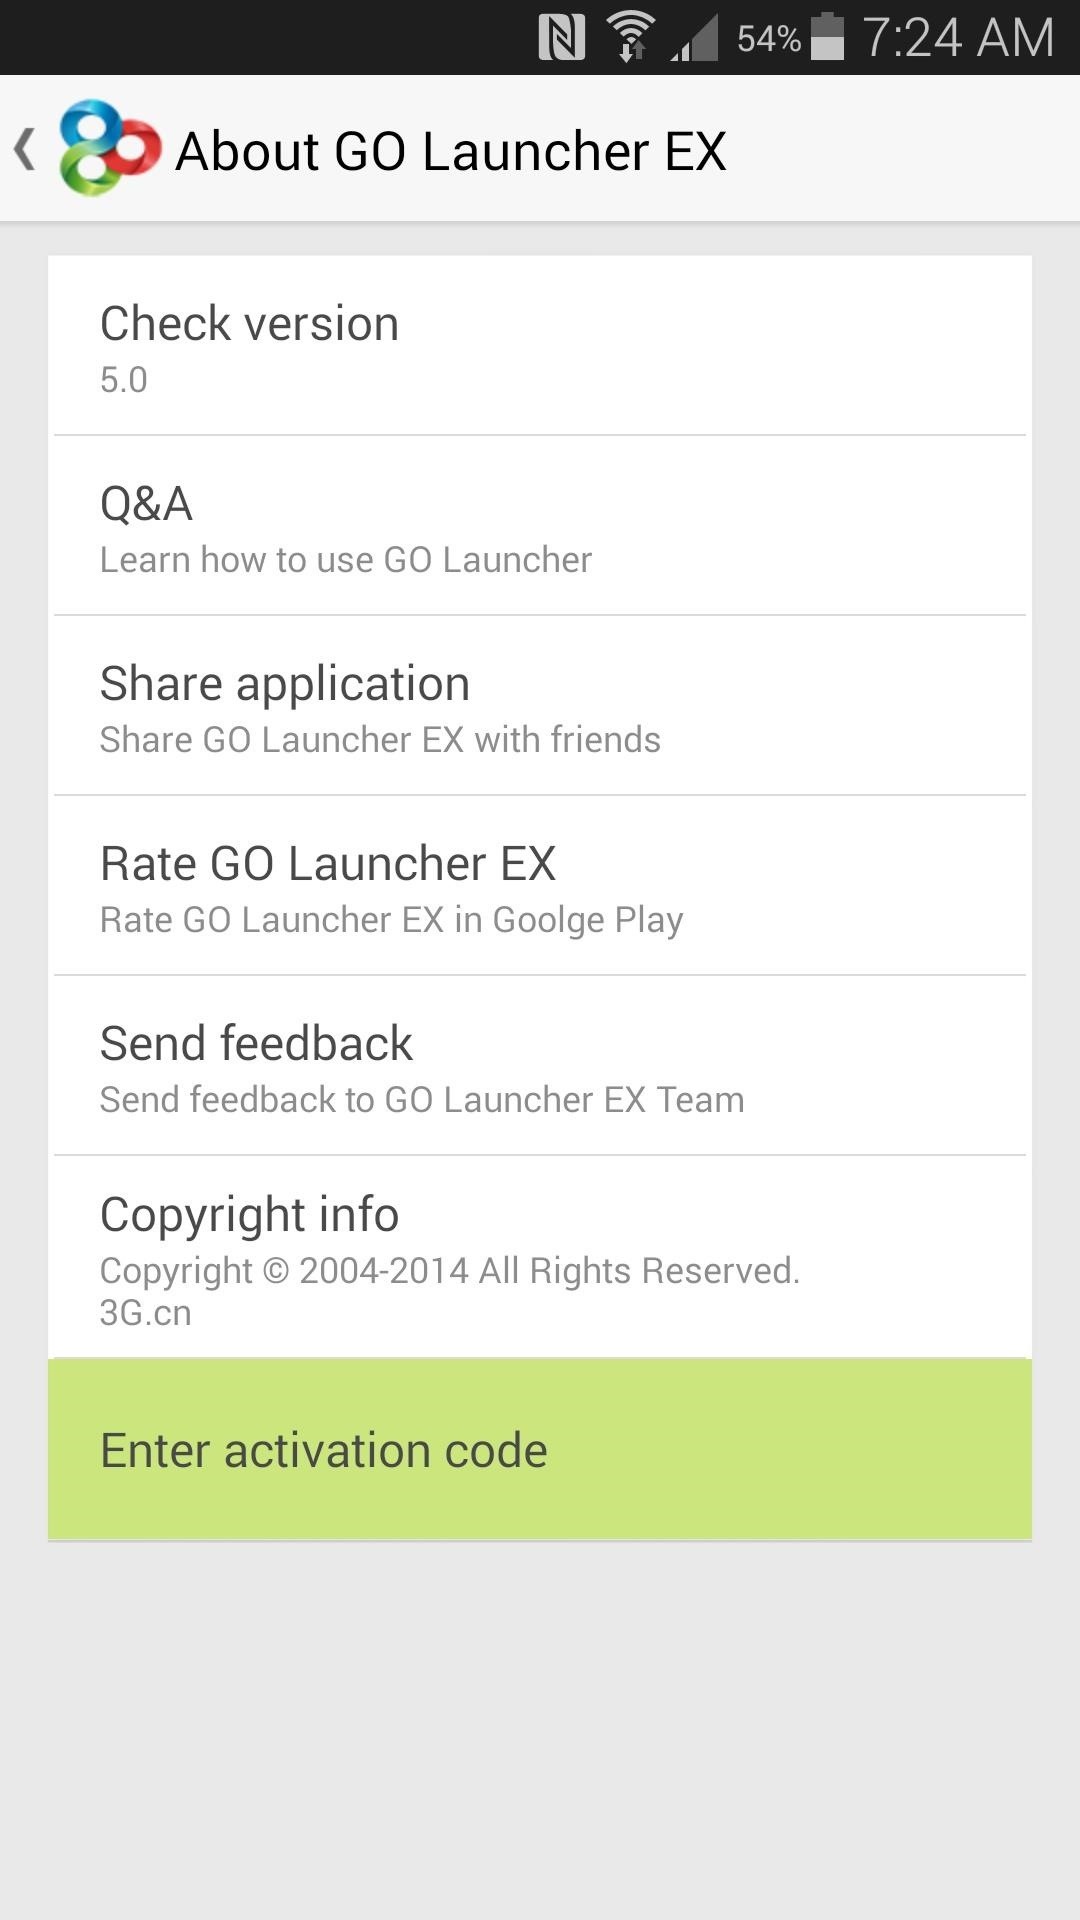 Immensely Popular Go Launcher Gets Big Update & Offers Free Prime Until June 1st